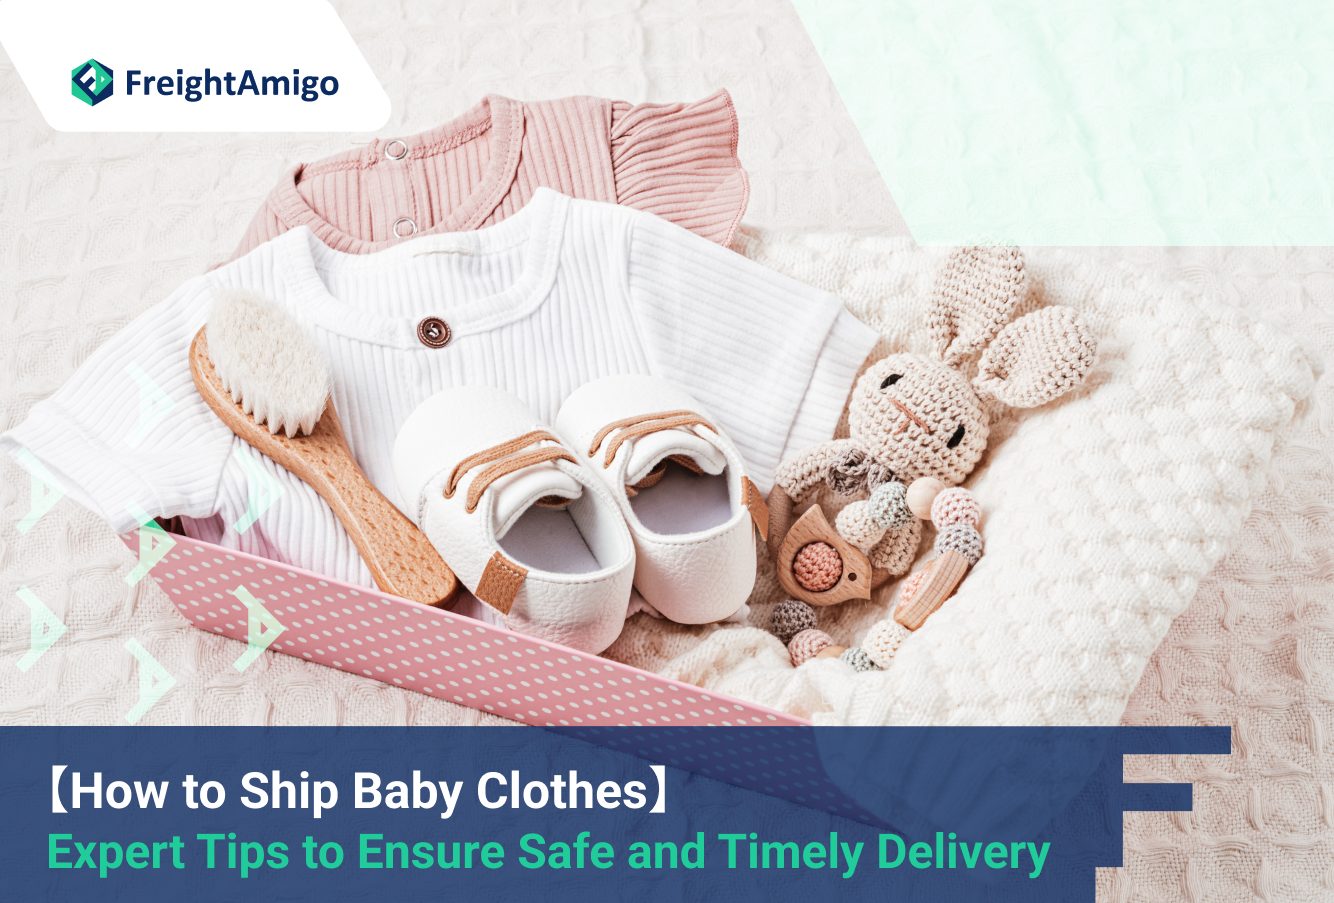 How to Ship Baby Clothes